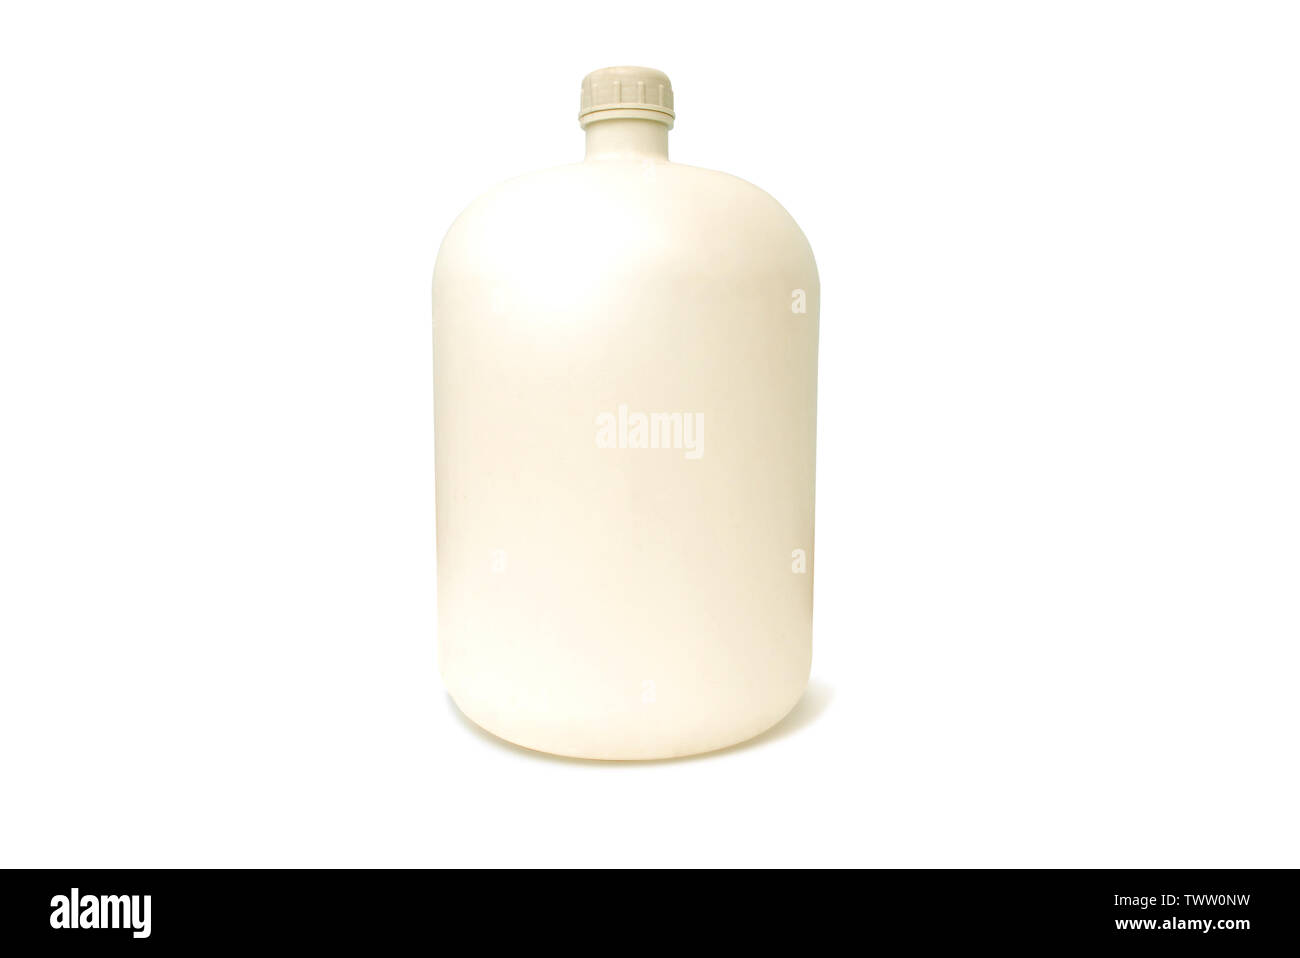 Opaque bottle 20 liter water bottle on white background.with clipping path. Stock Photo